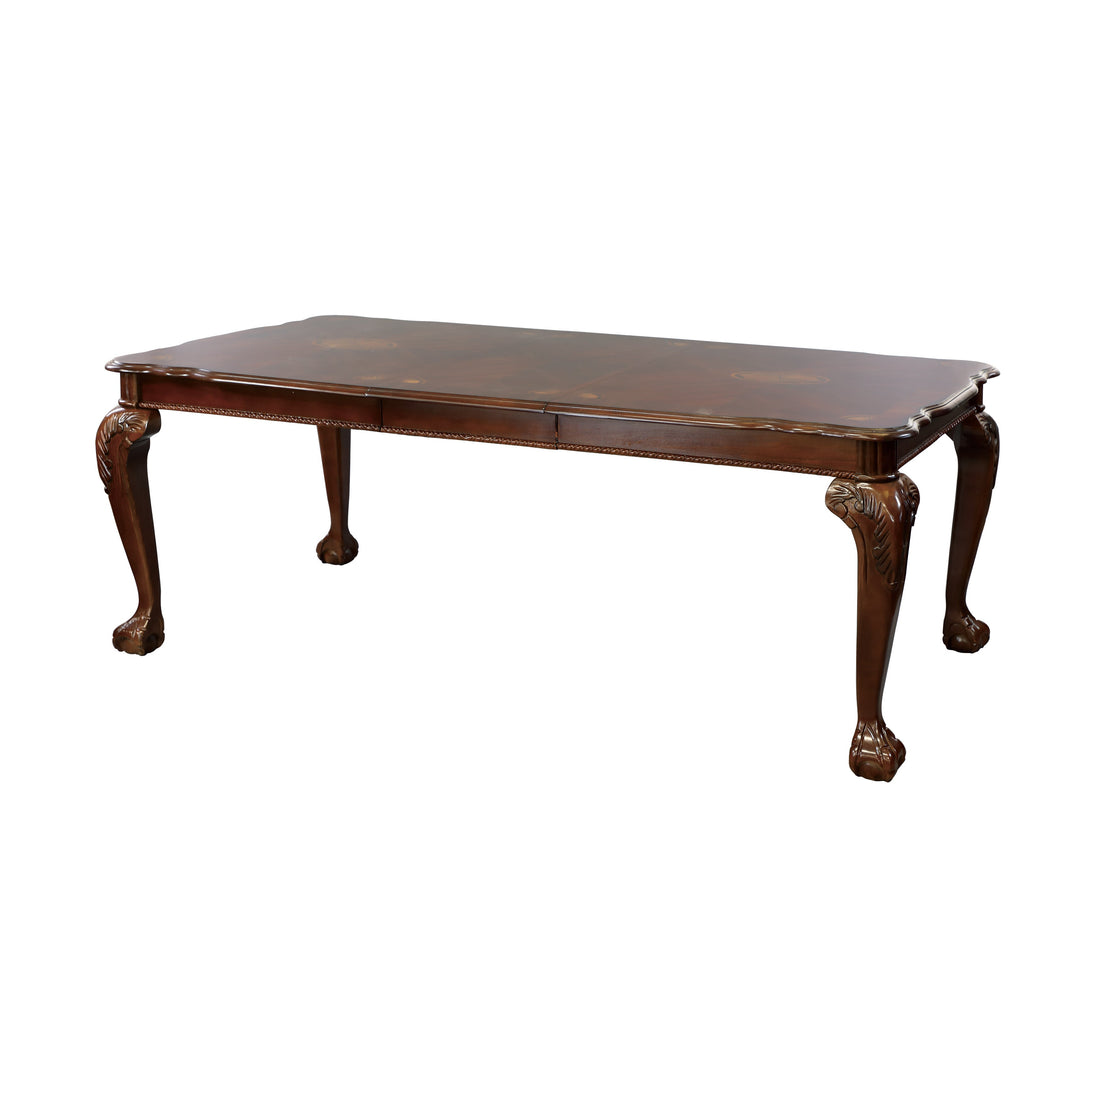 Norwich Dark Cherry Extendable Dining Table - 5055-82 - Bien Home Furniture &amp; Electronics